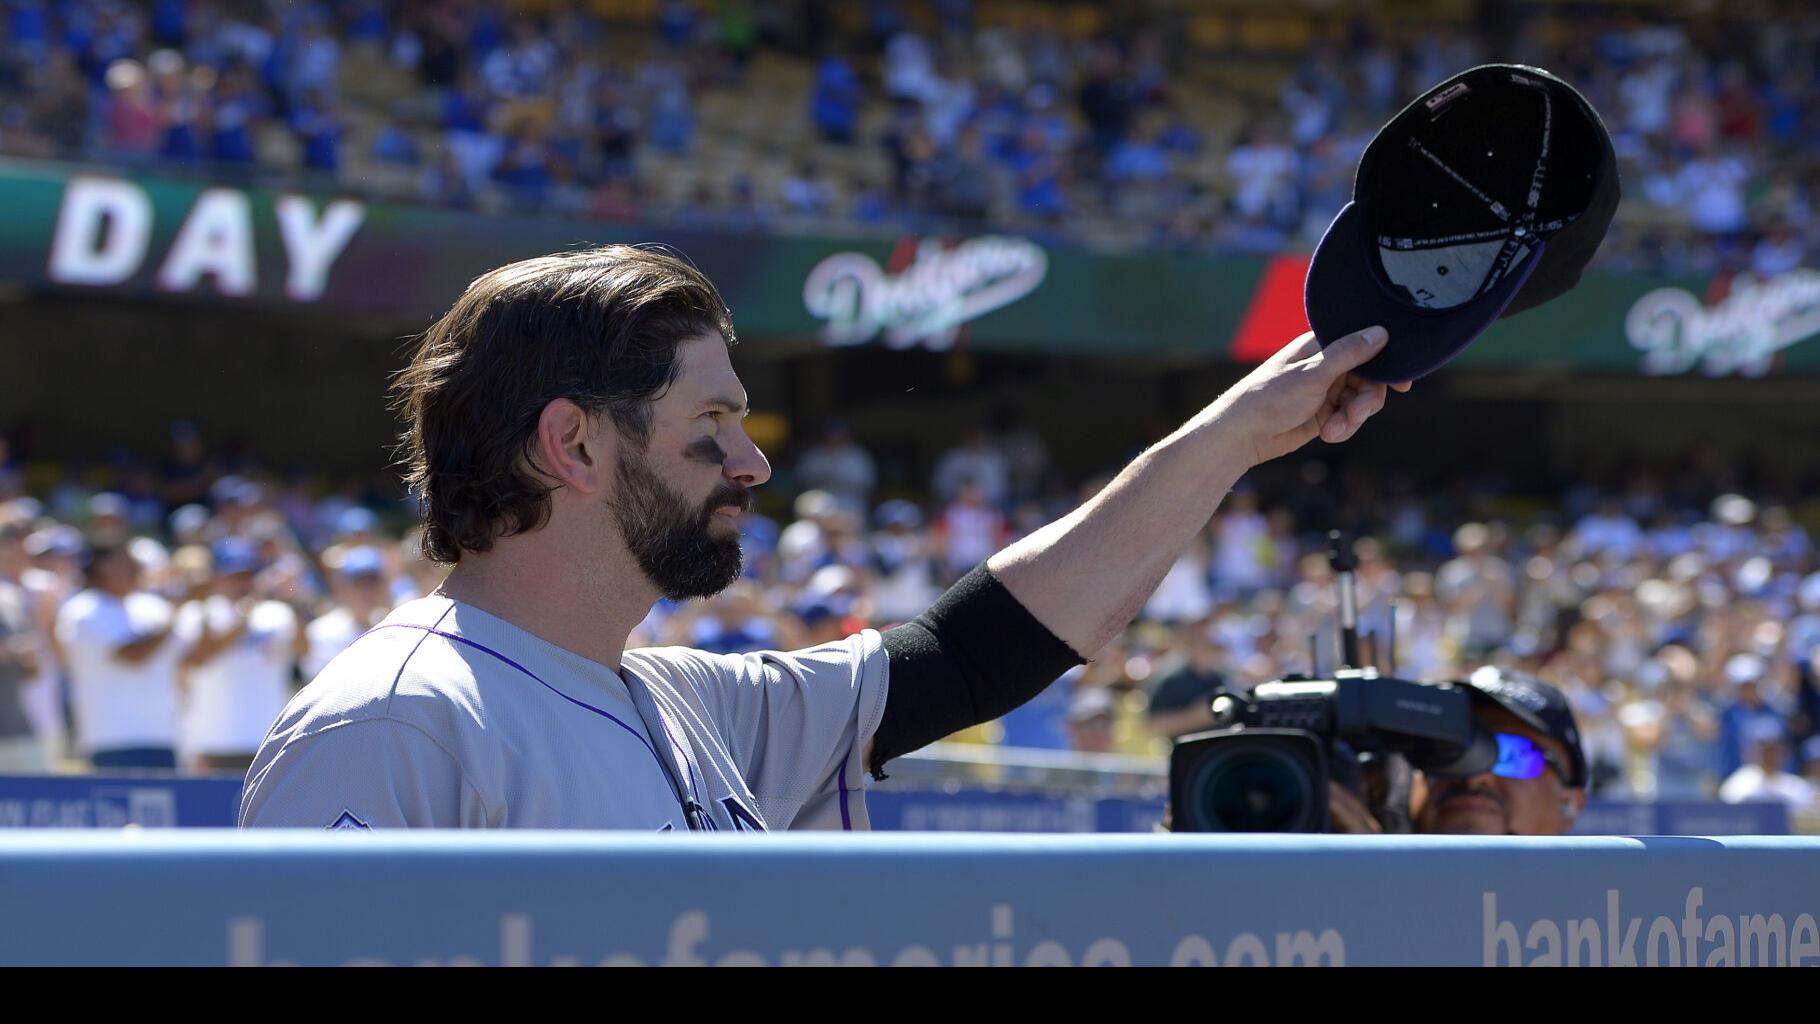 Todd Helton's Hall of Fame chance looks like a “nail-biter